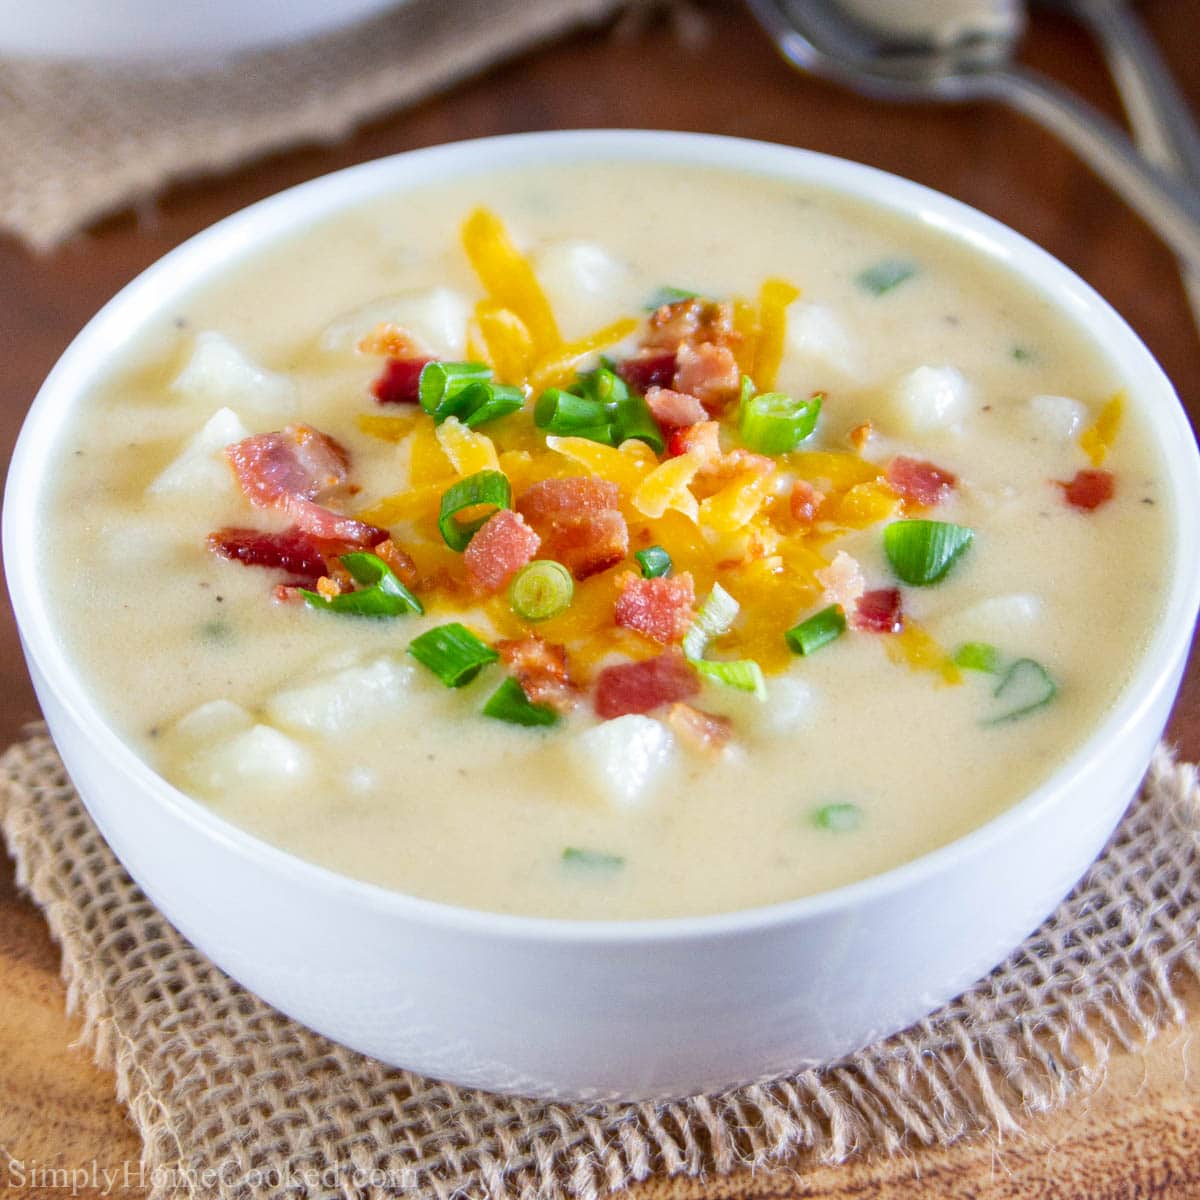 https://simplyhomecooked.com/wp-content/uploads/2021/09/baked-potato-soup-2.jpg